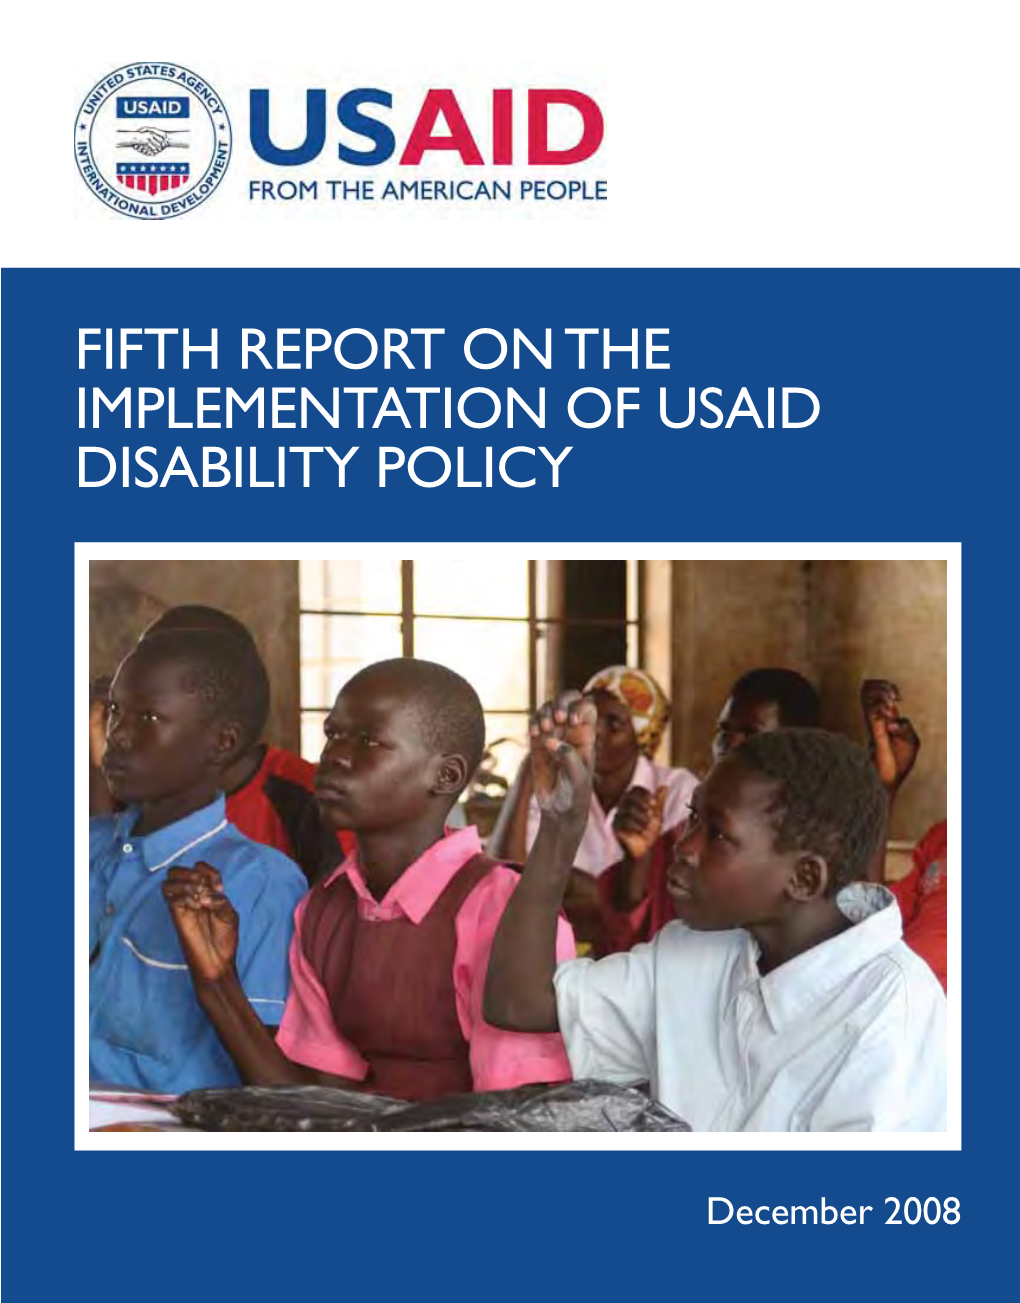 Fifth Report on the Implementation of Usaid Disability Policy